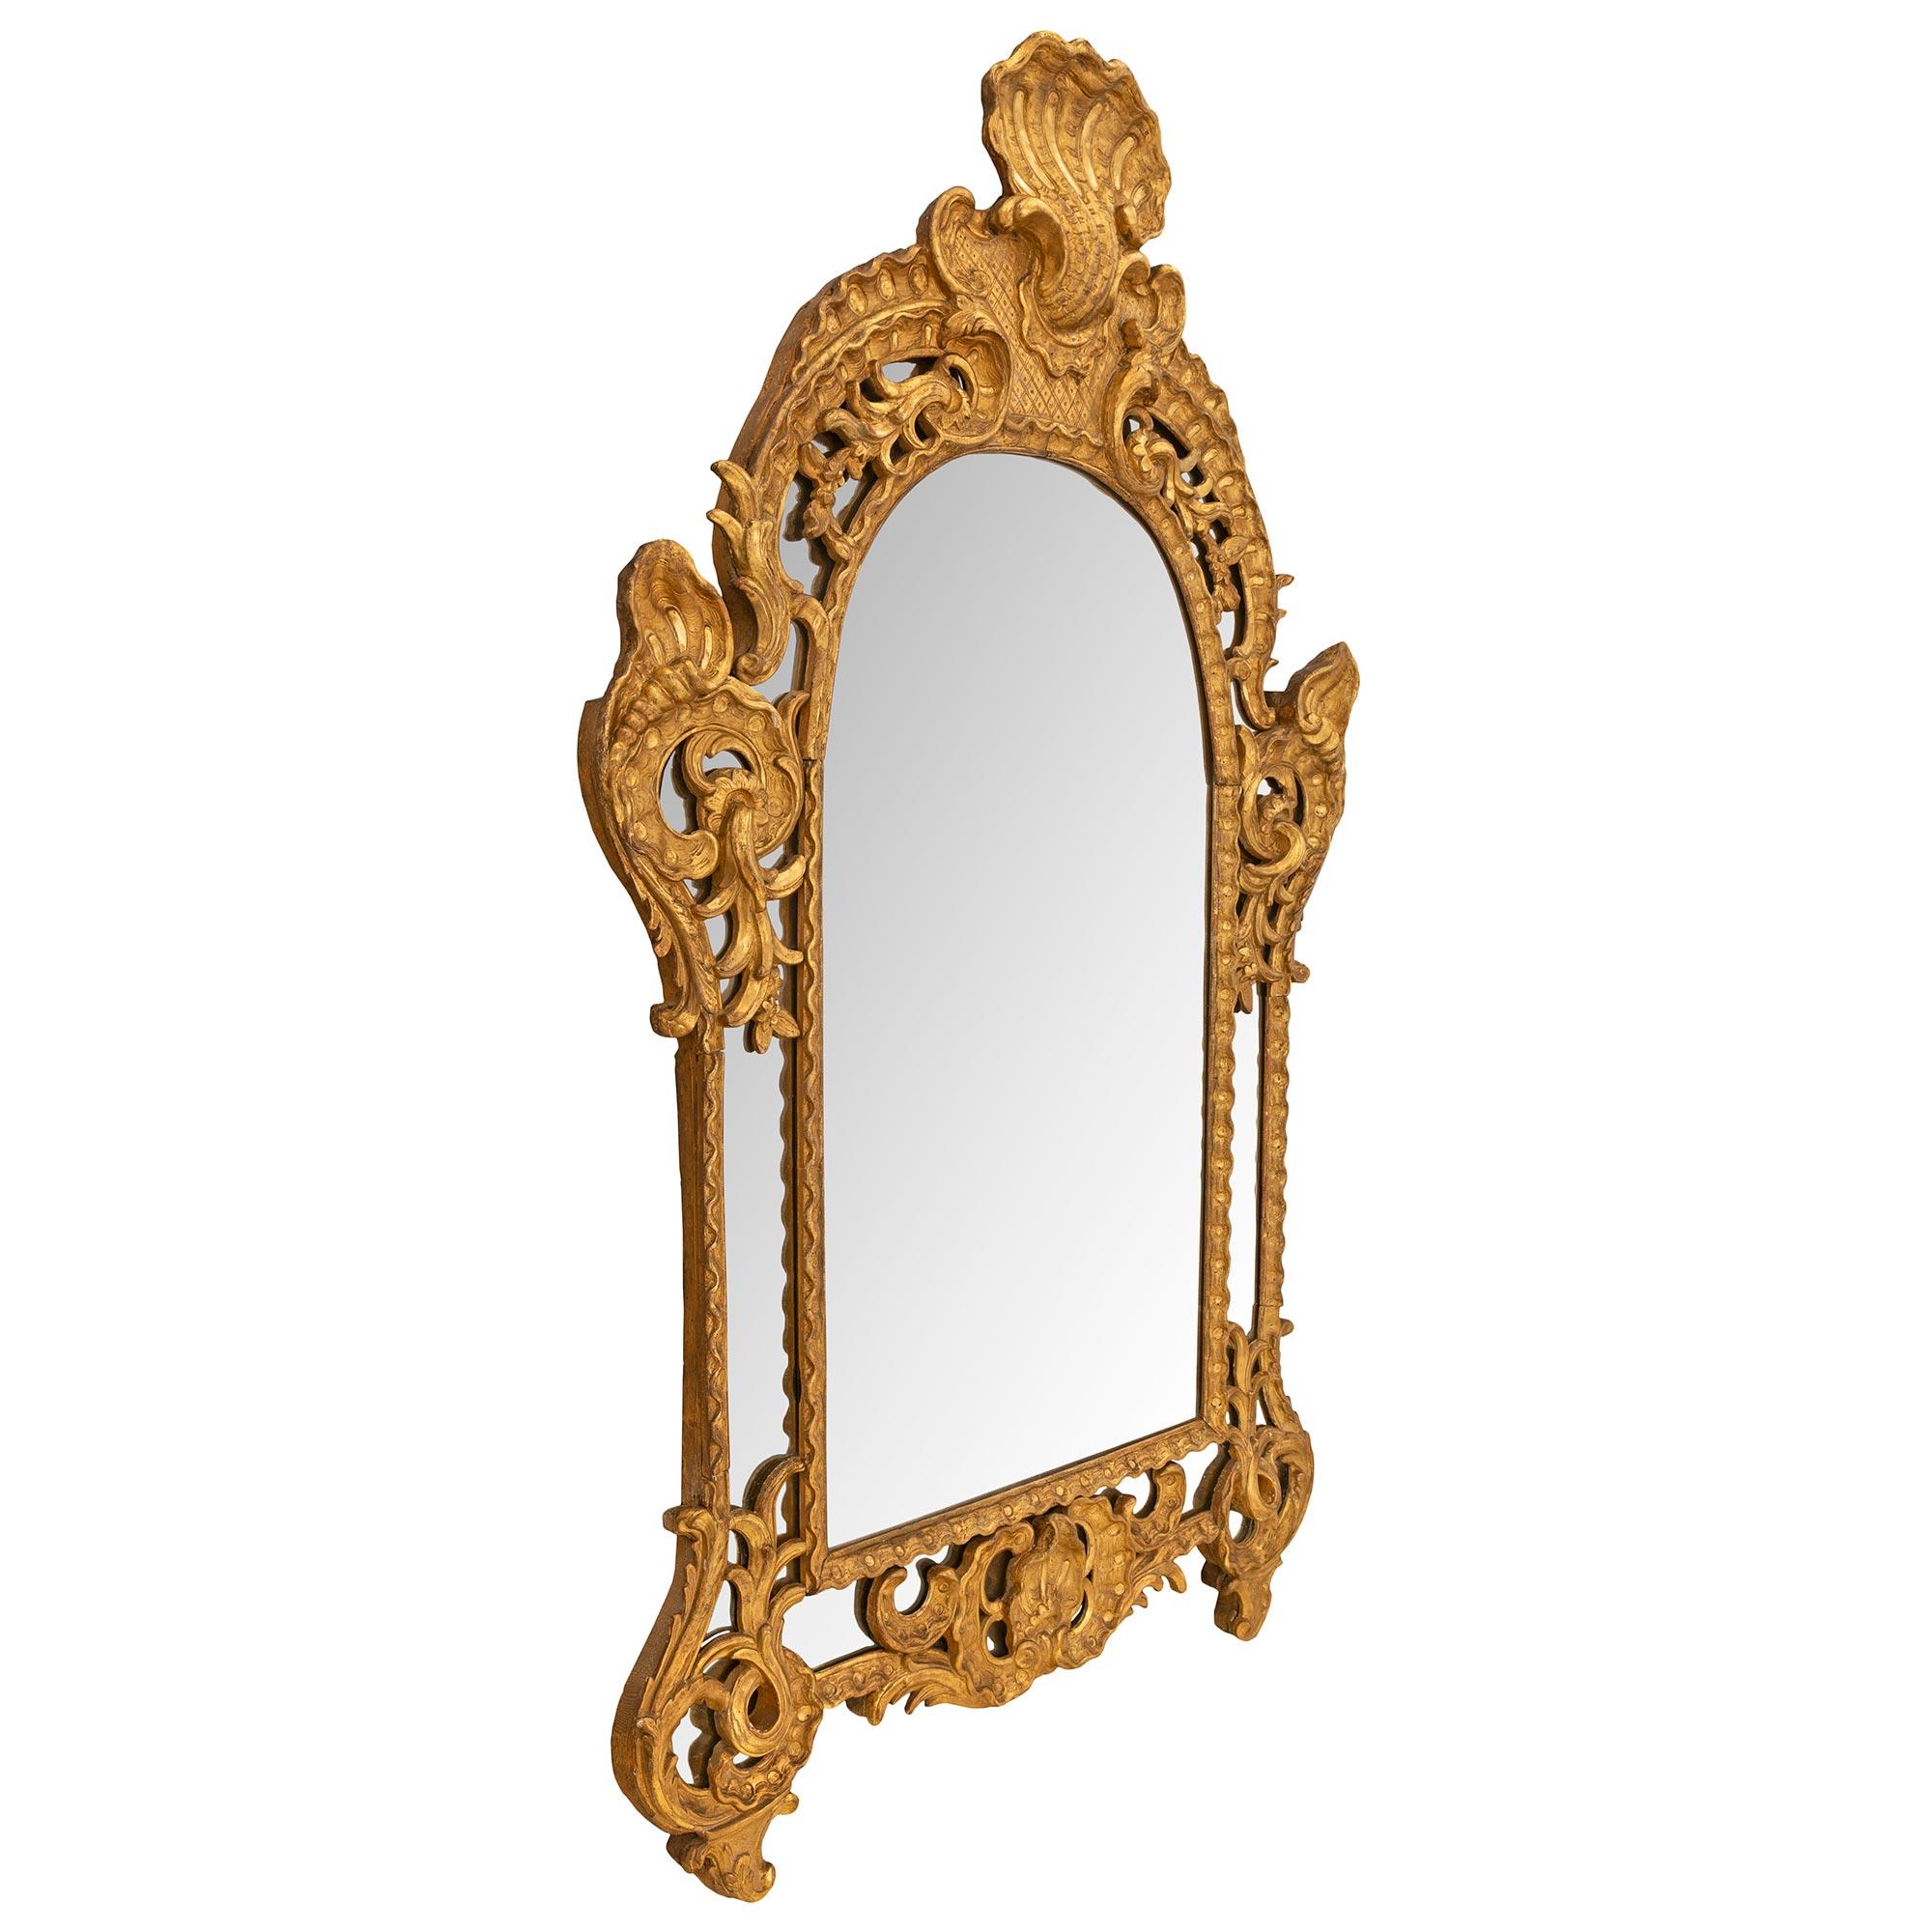 A sensational and very high quality French early 18th century Regence period giltwood double frame mirror, circa 1720. The mirror retains all of its original mirror plates throughout with the central one set within a unique and most decorative wave